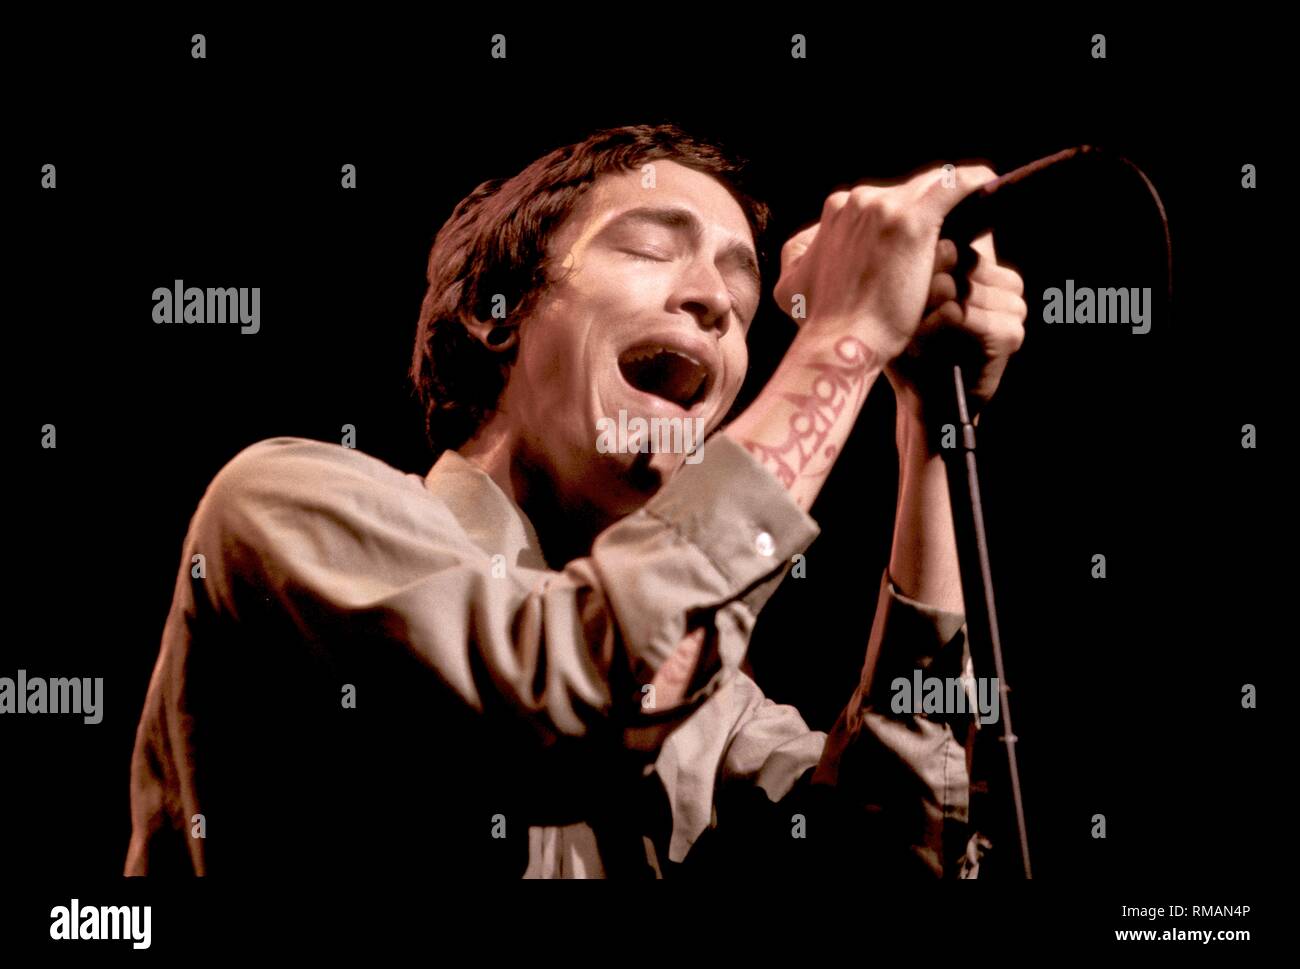 Singer Brandon Boyd of the rock band Incubus, is show performing on stage during a 'live' concert appearance. Stock Photo